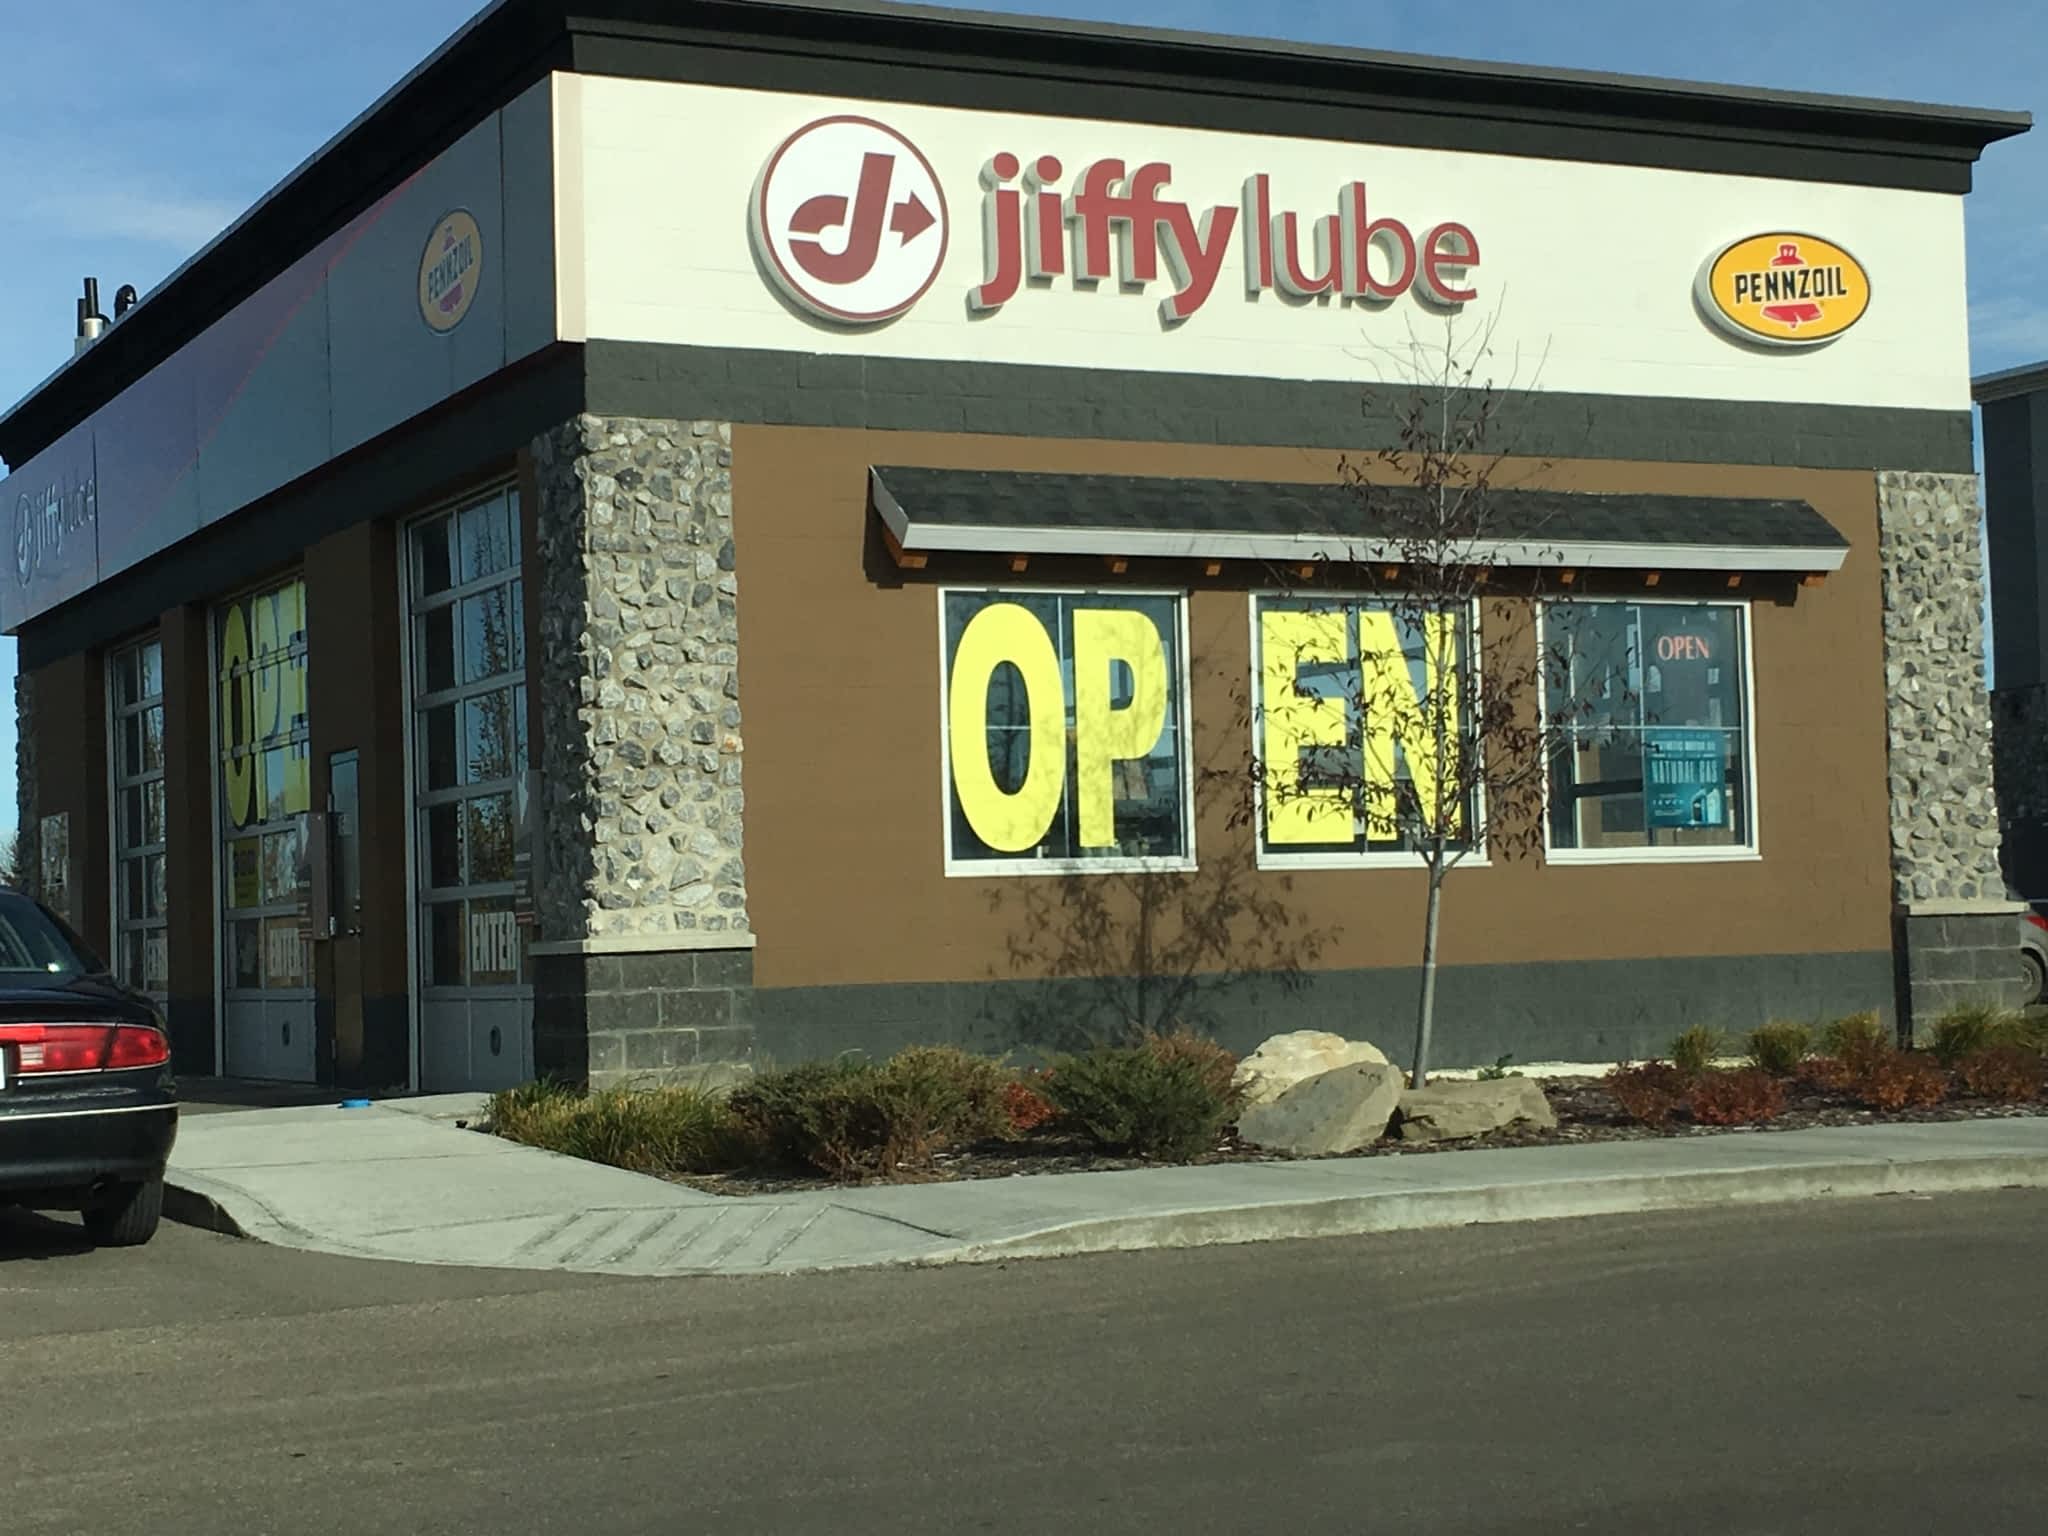 jiffy lube services cost